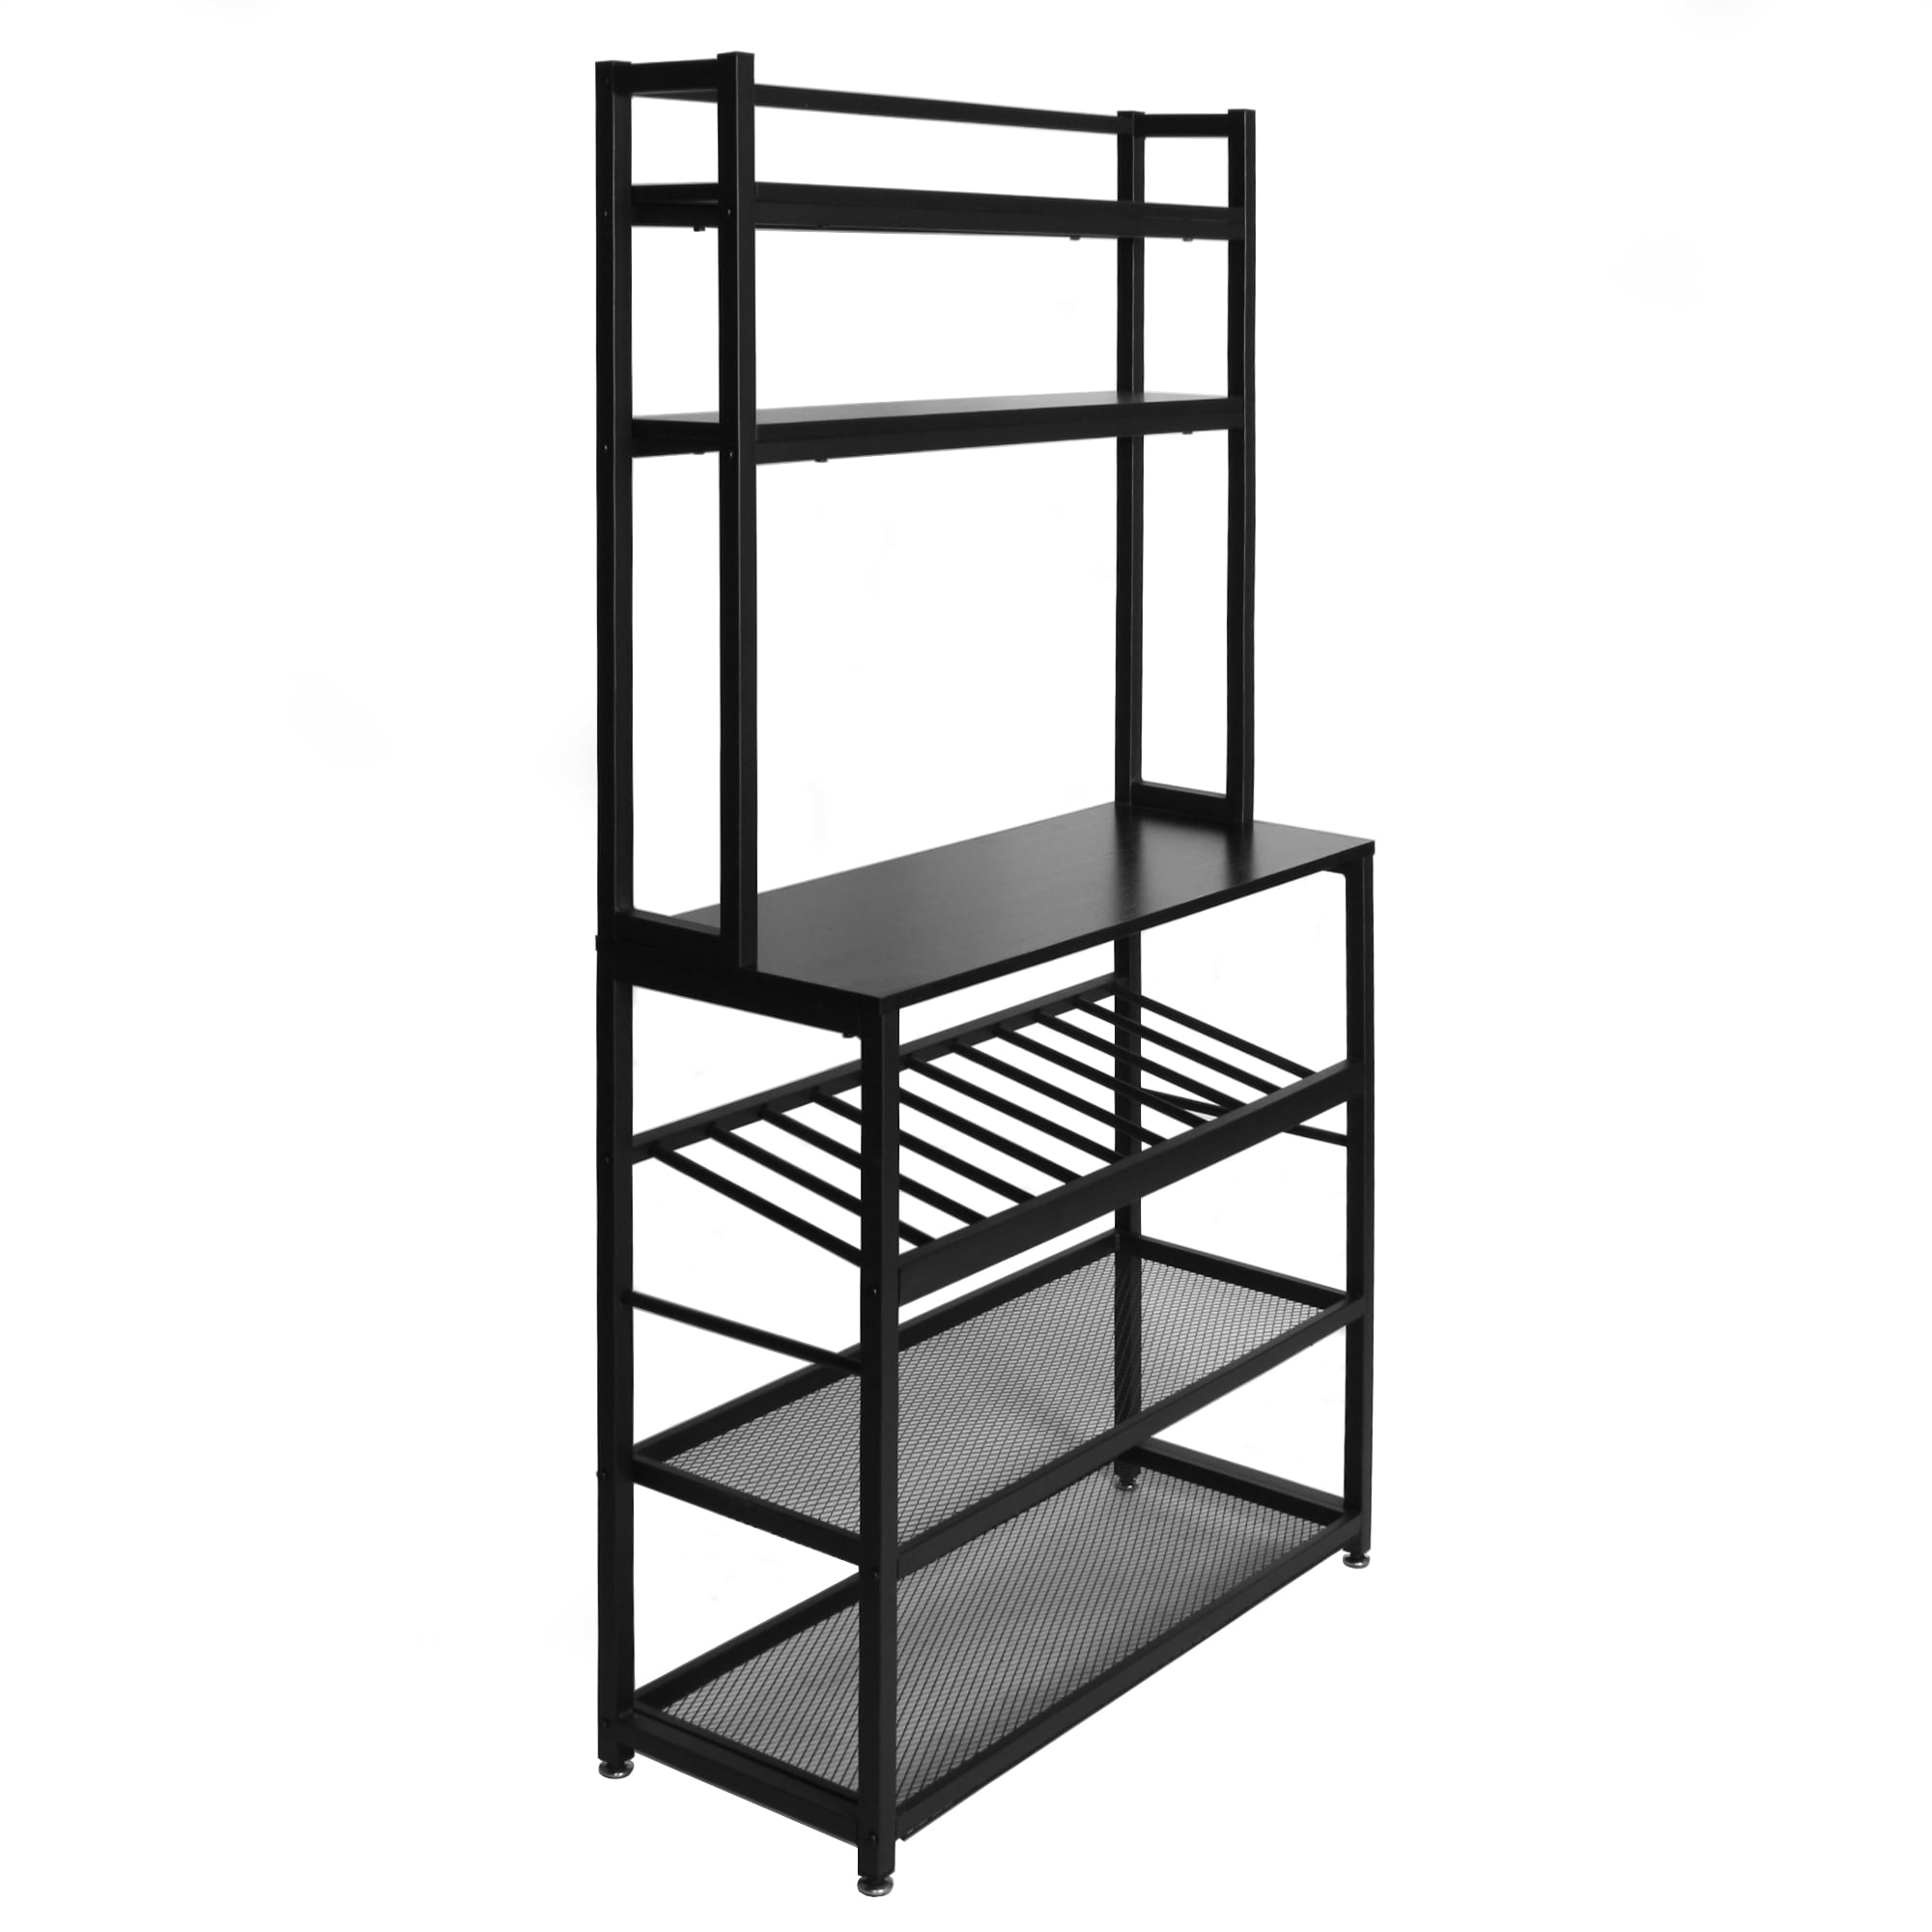 Picture of Better Home 616859965478 66.5 x 35.5 x 13.75 in. 6 Tier Metal Kitchen Bakers Rack with Wine Rack, Black